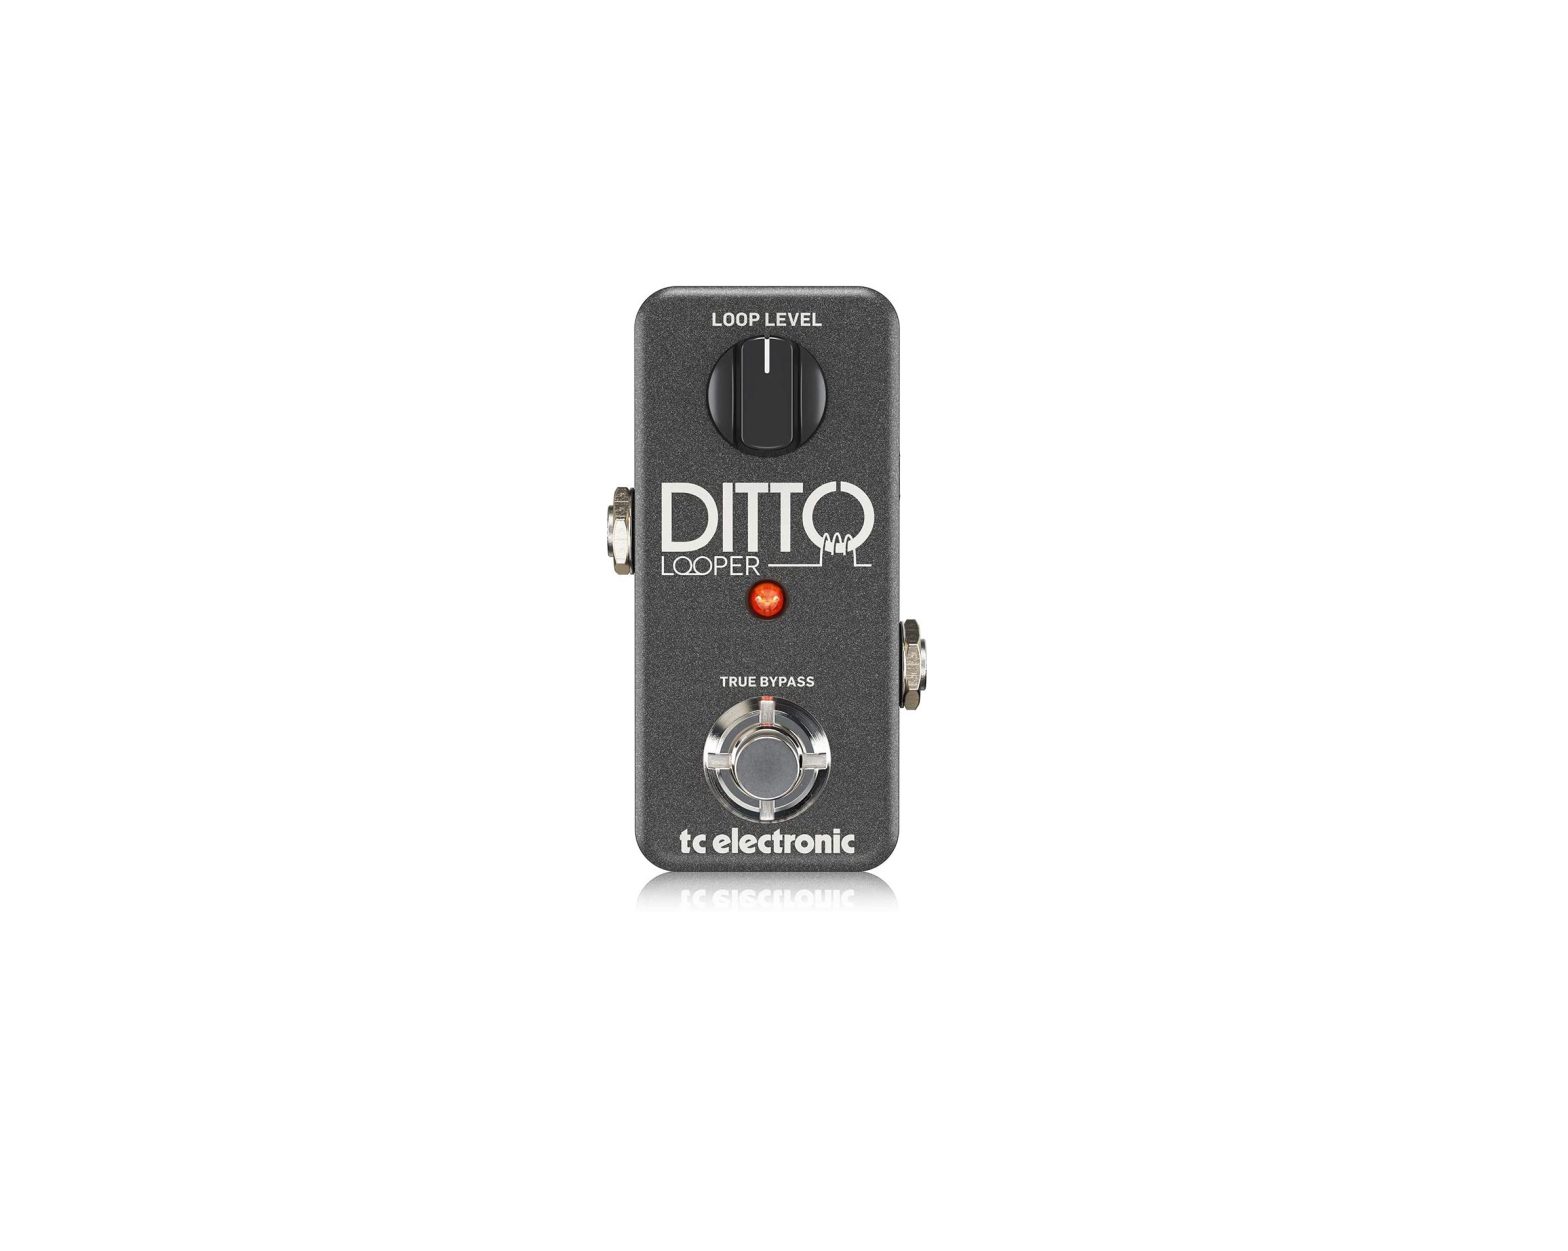 tc electronic Ditto Looper Pedal User Guide